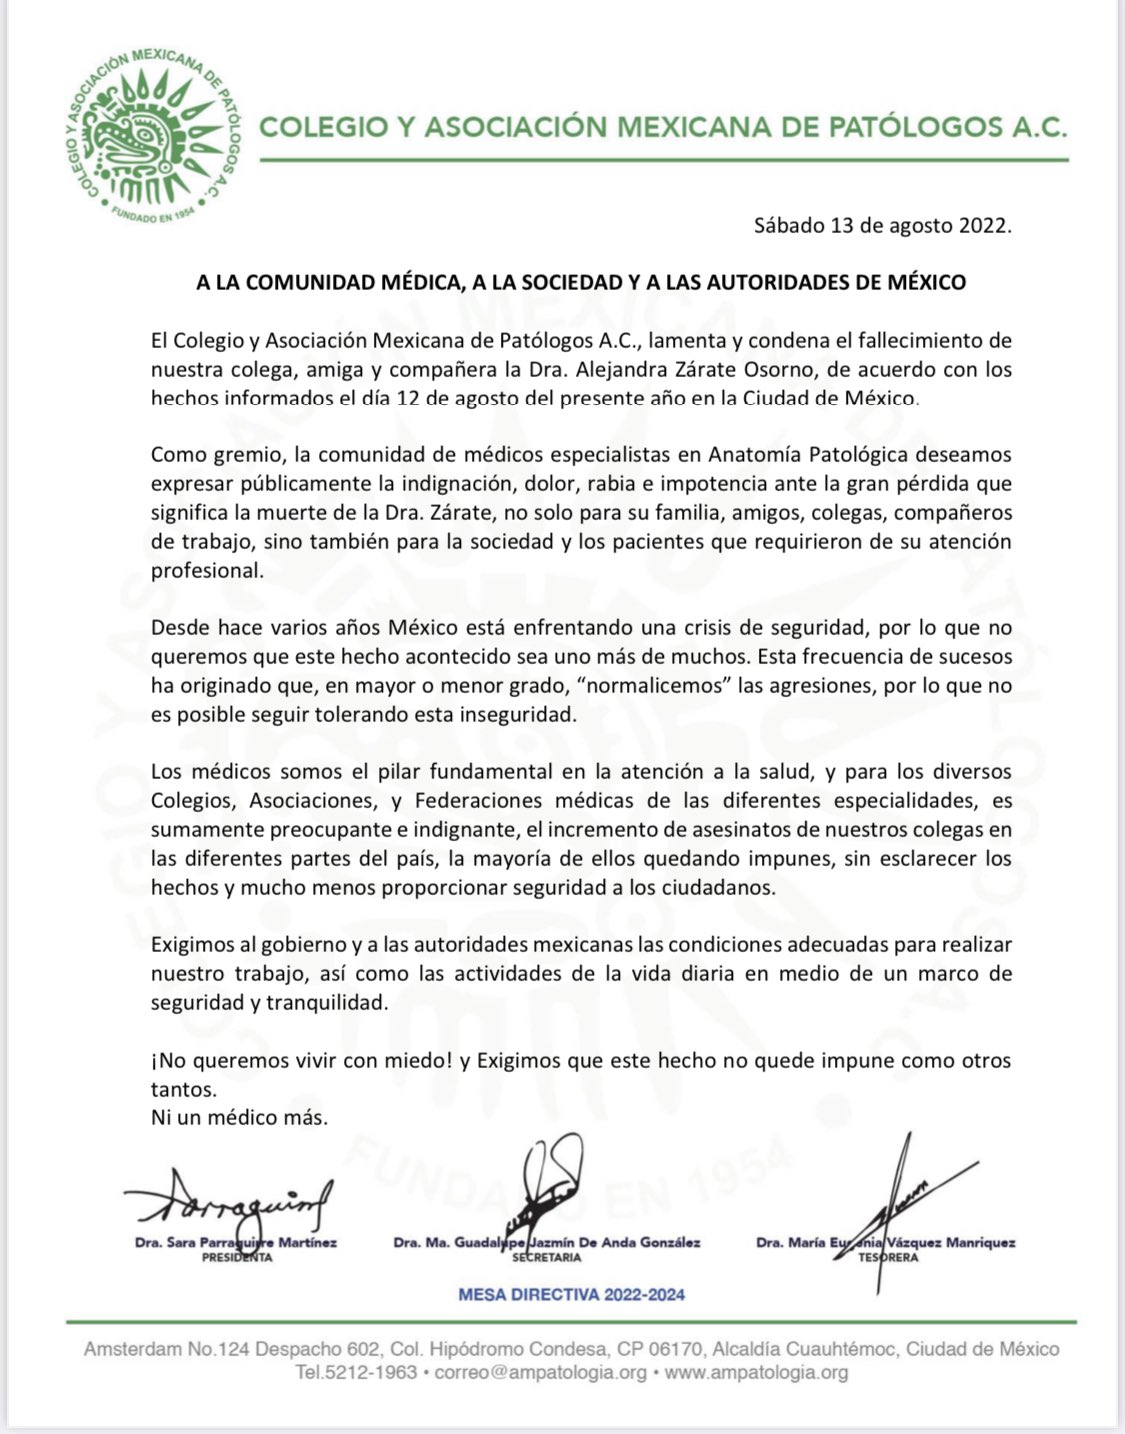 The Pathological Anatomy Guild issued a statement (Photo: Twitter/ @MarcelaSaebL)